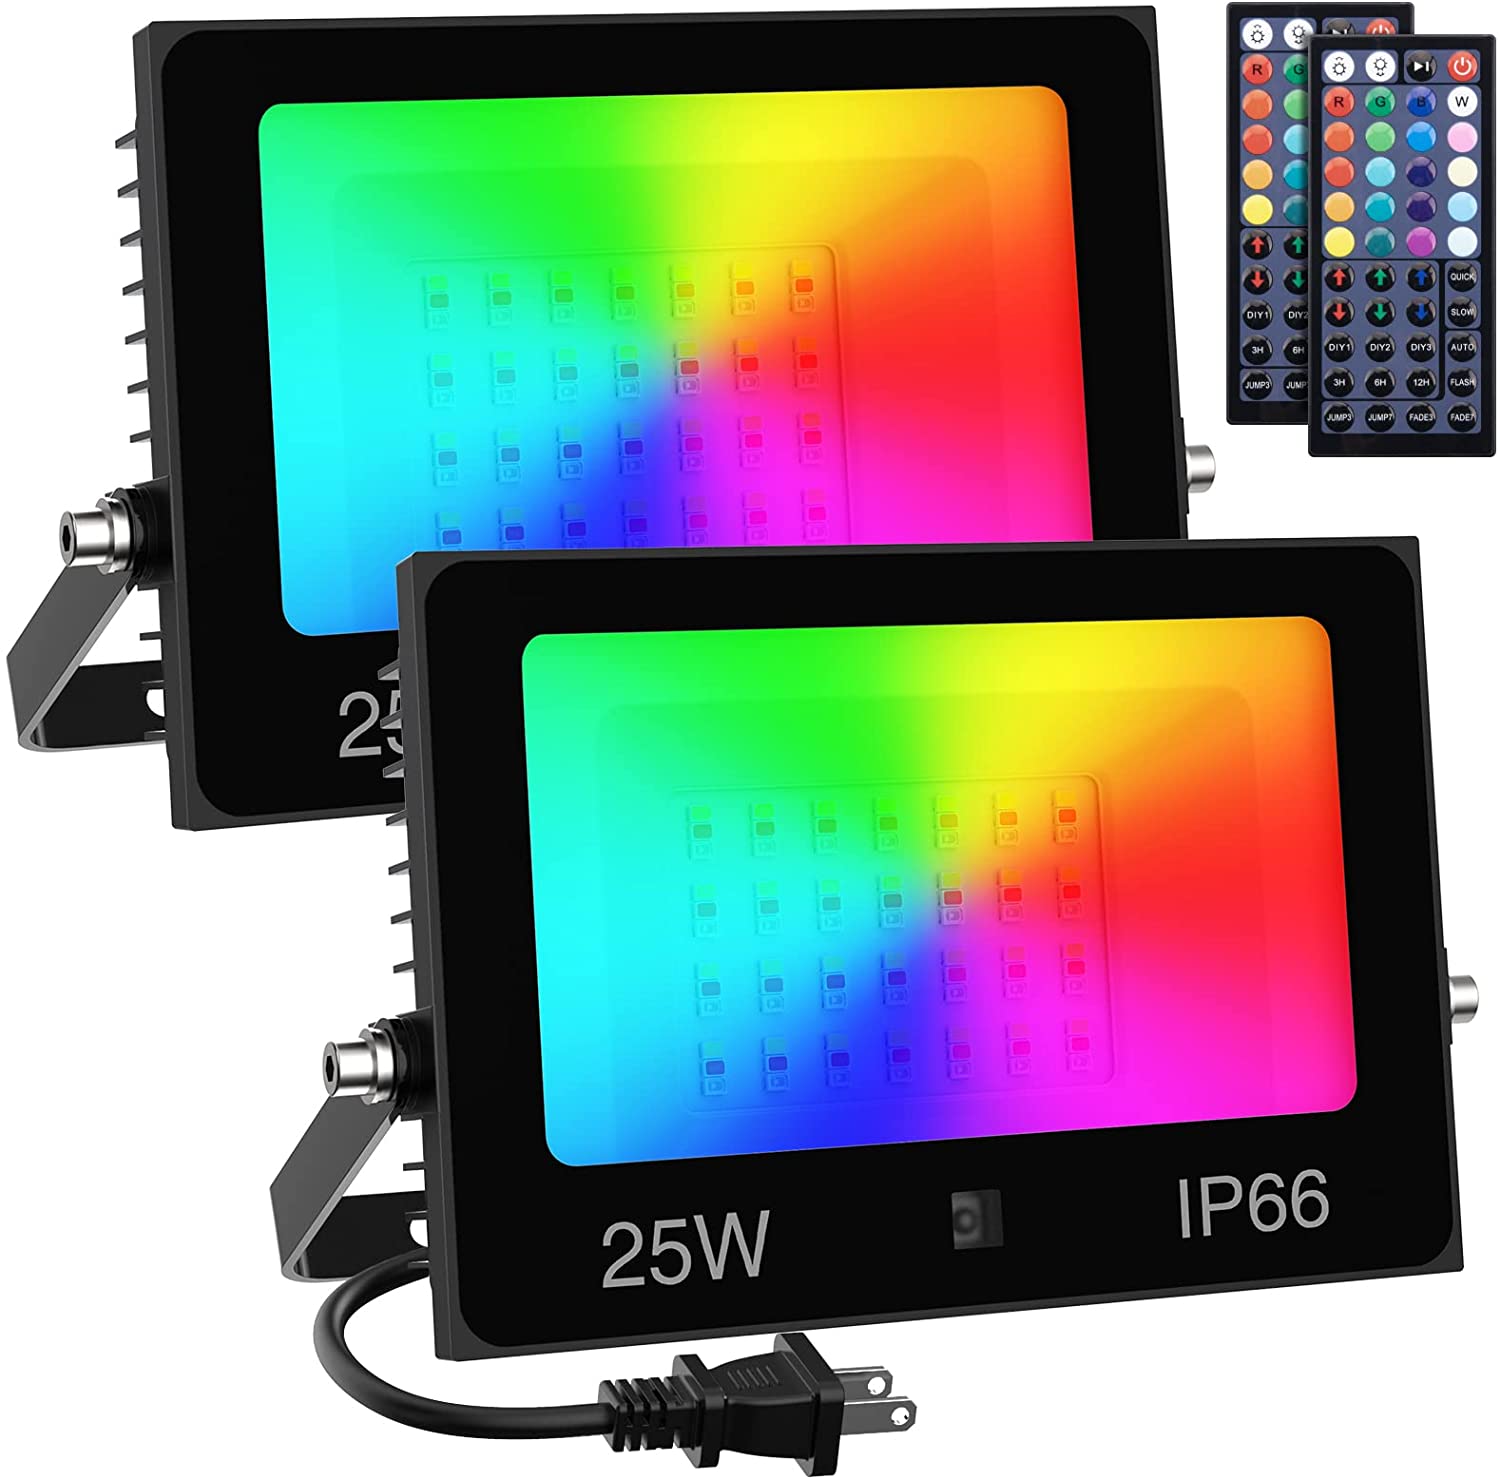 Olafus 2 Pack 15W or 25W RGB Flood Lights $18.99 - $22.99 + Free shipping w/ Prime or $25+